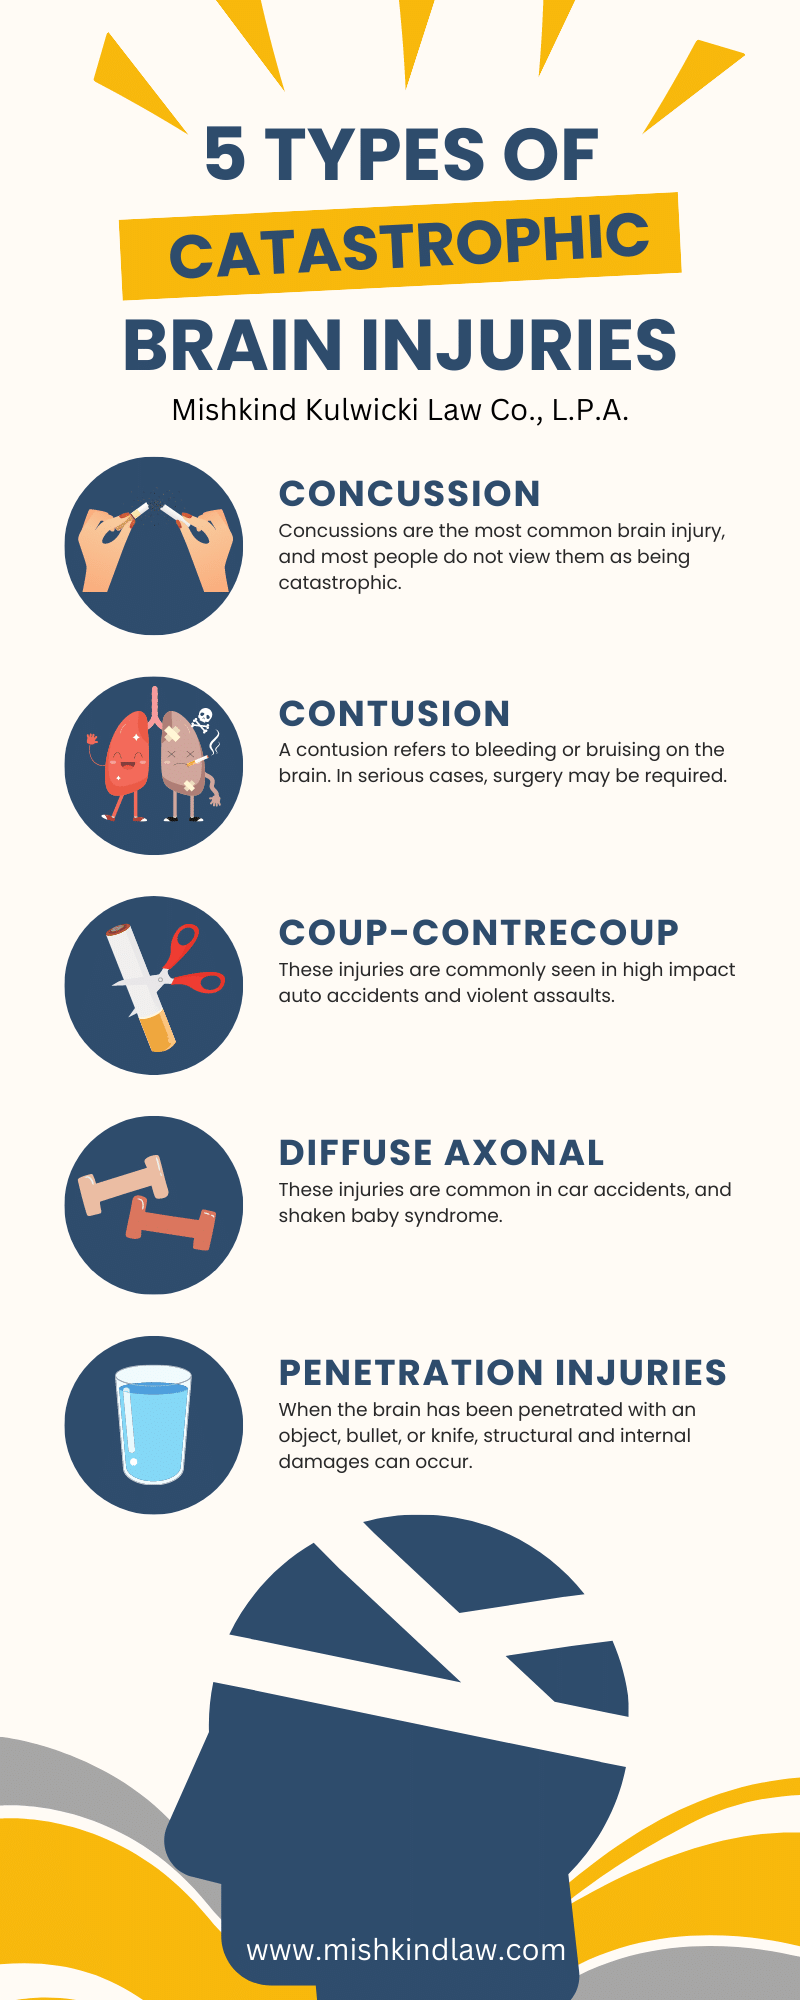 Types of Catastrophic Brain Injuries Infographic